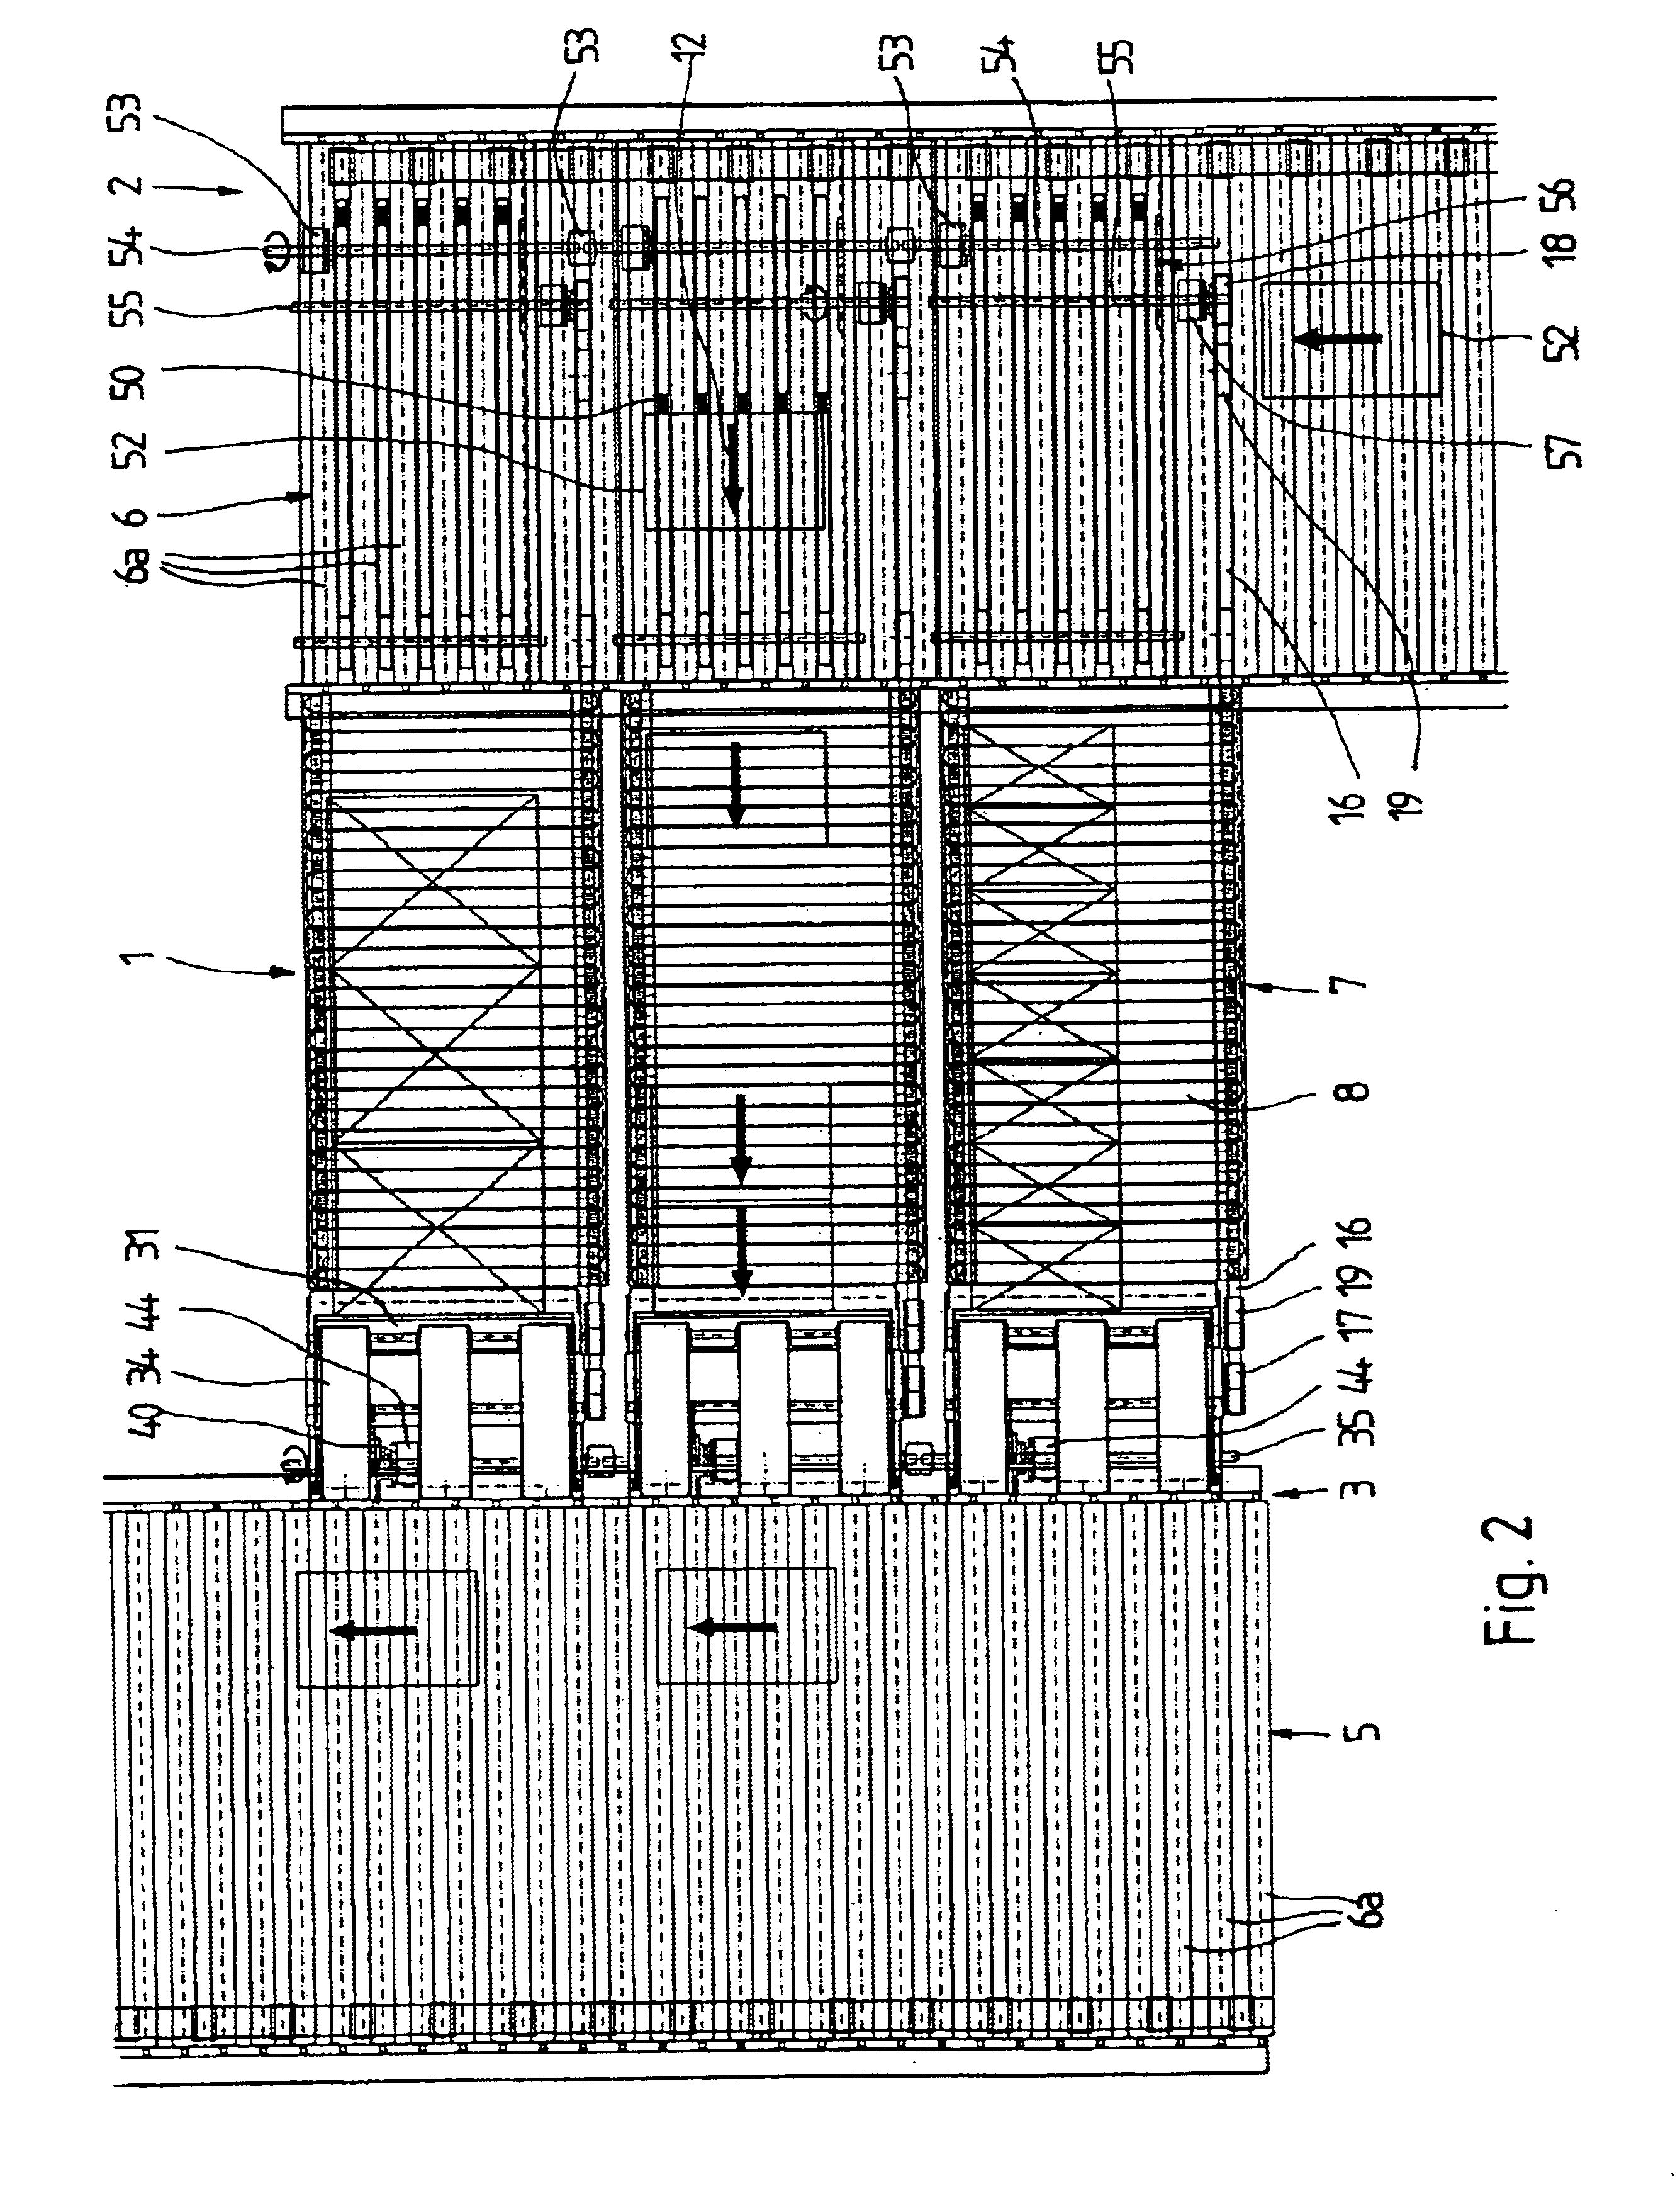 Conveying and/or storage device for packaged goods